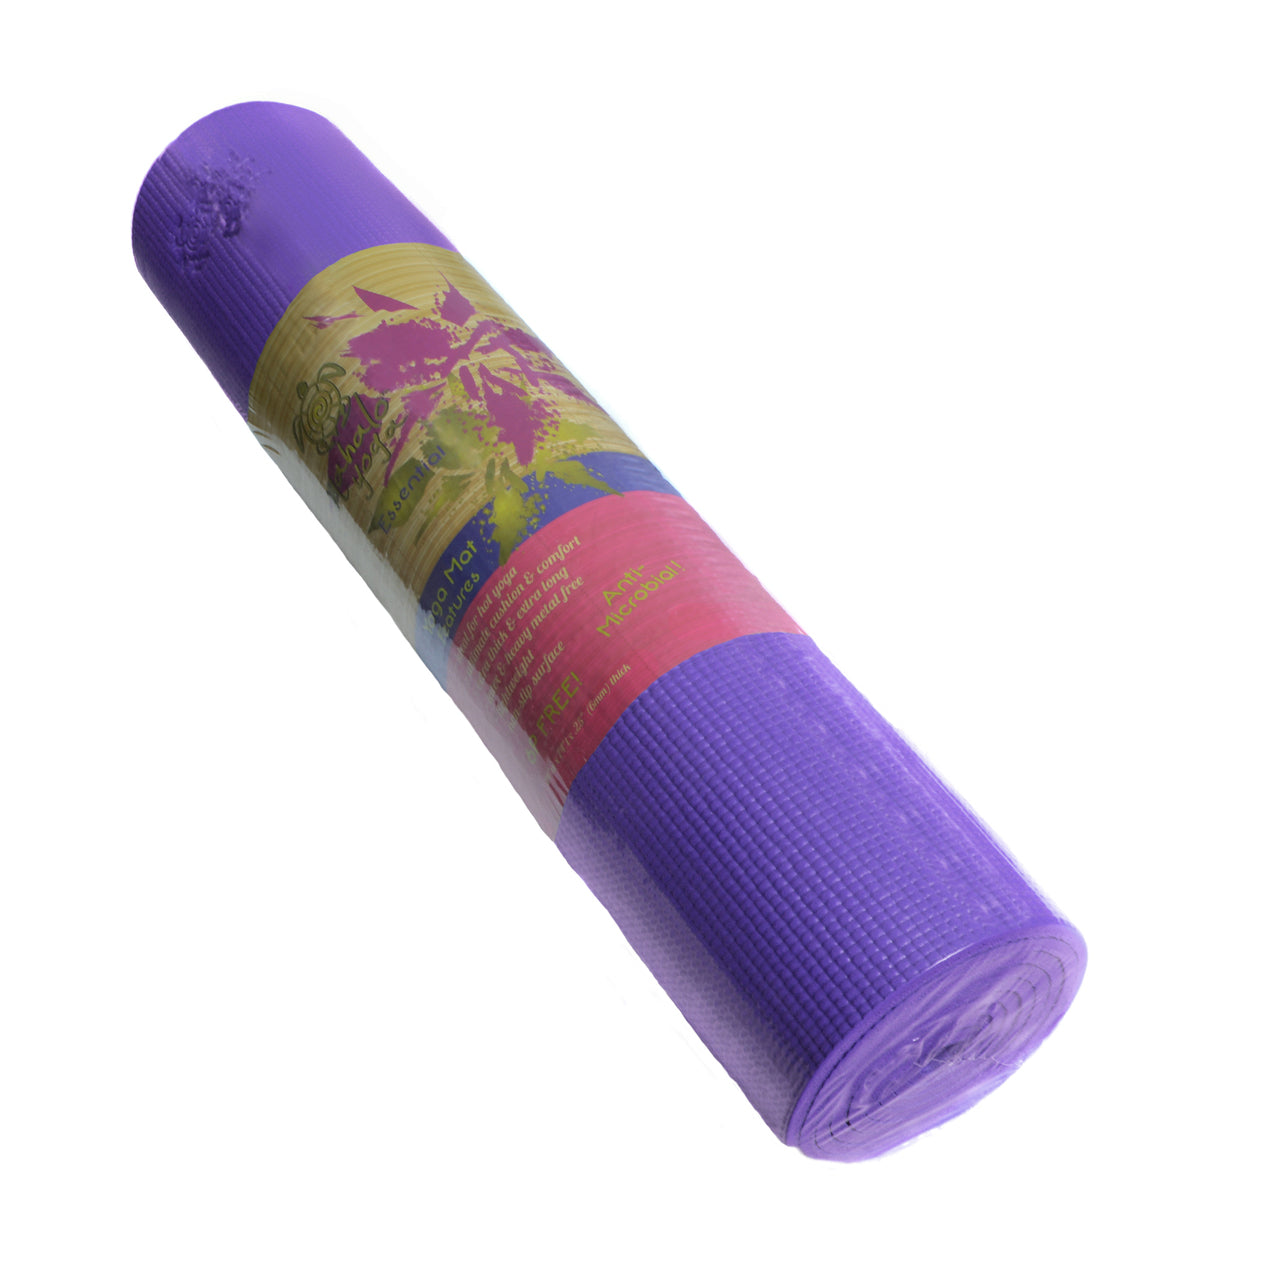 Mahalo MicroClean Thick Yoga Mat – Lucidly Lola